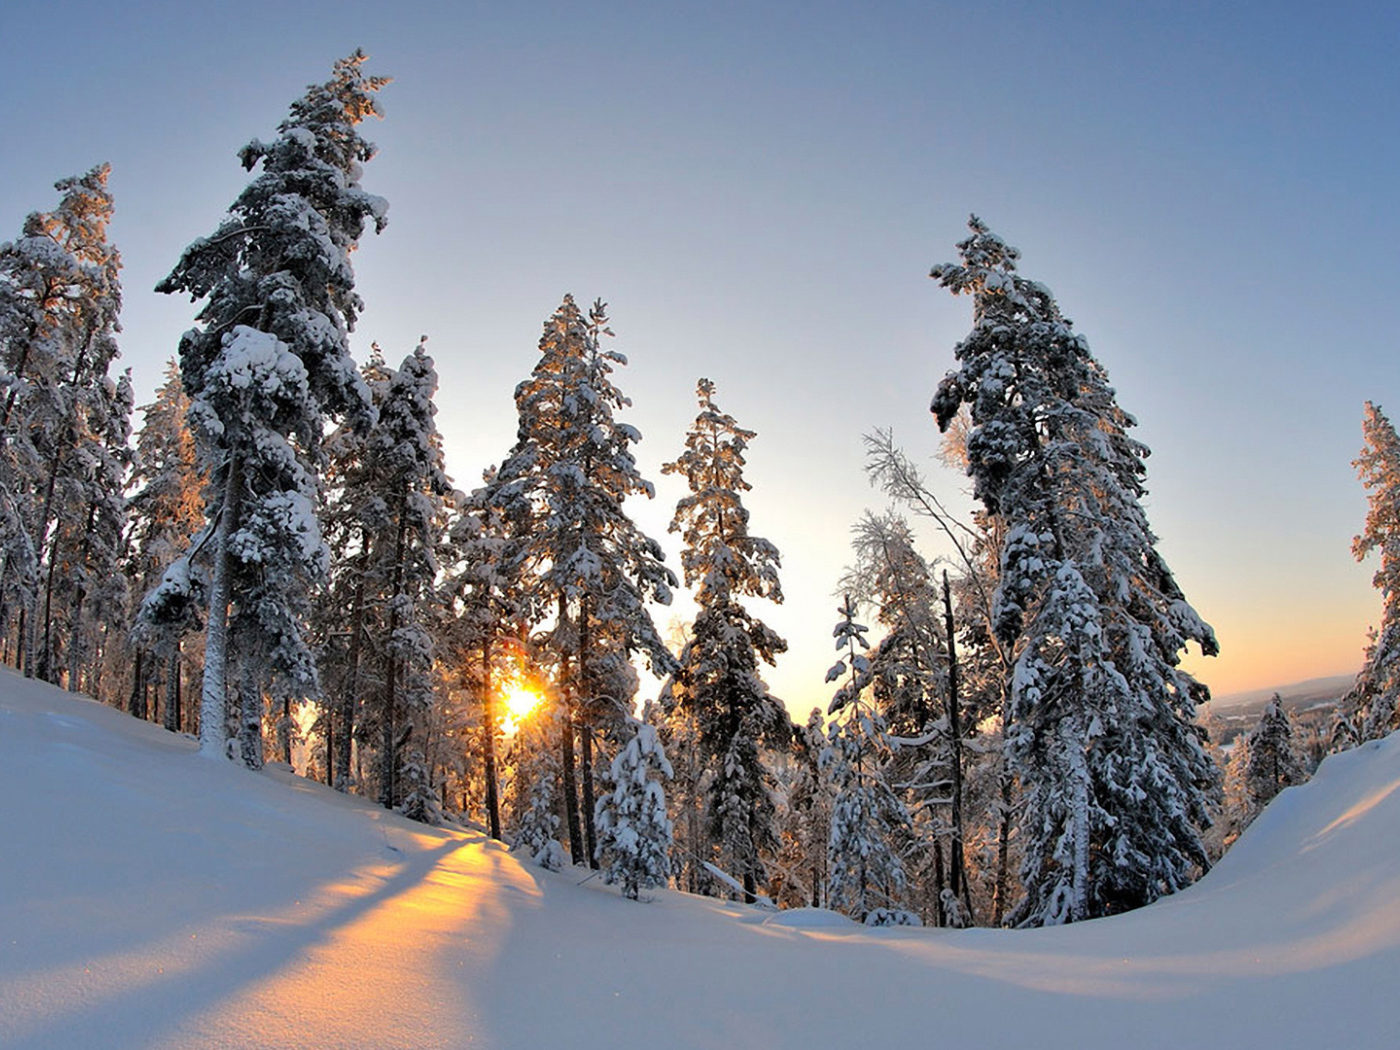 Trees under heavy snow in winter forest